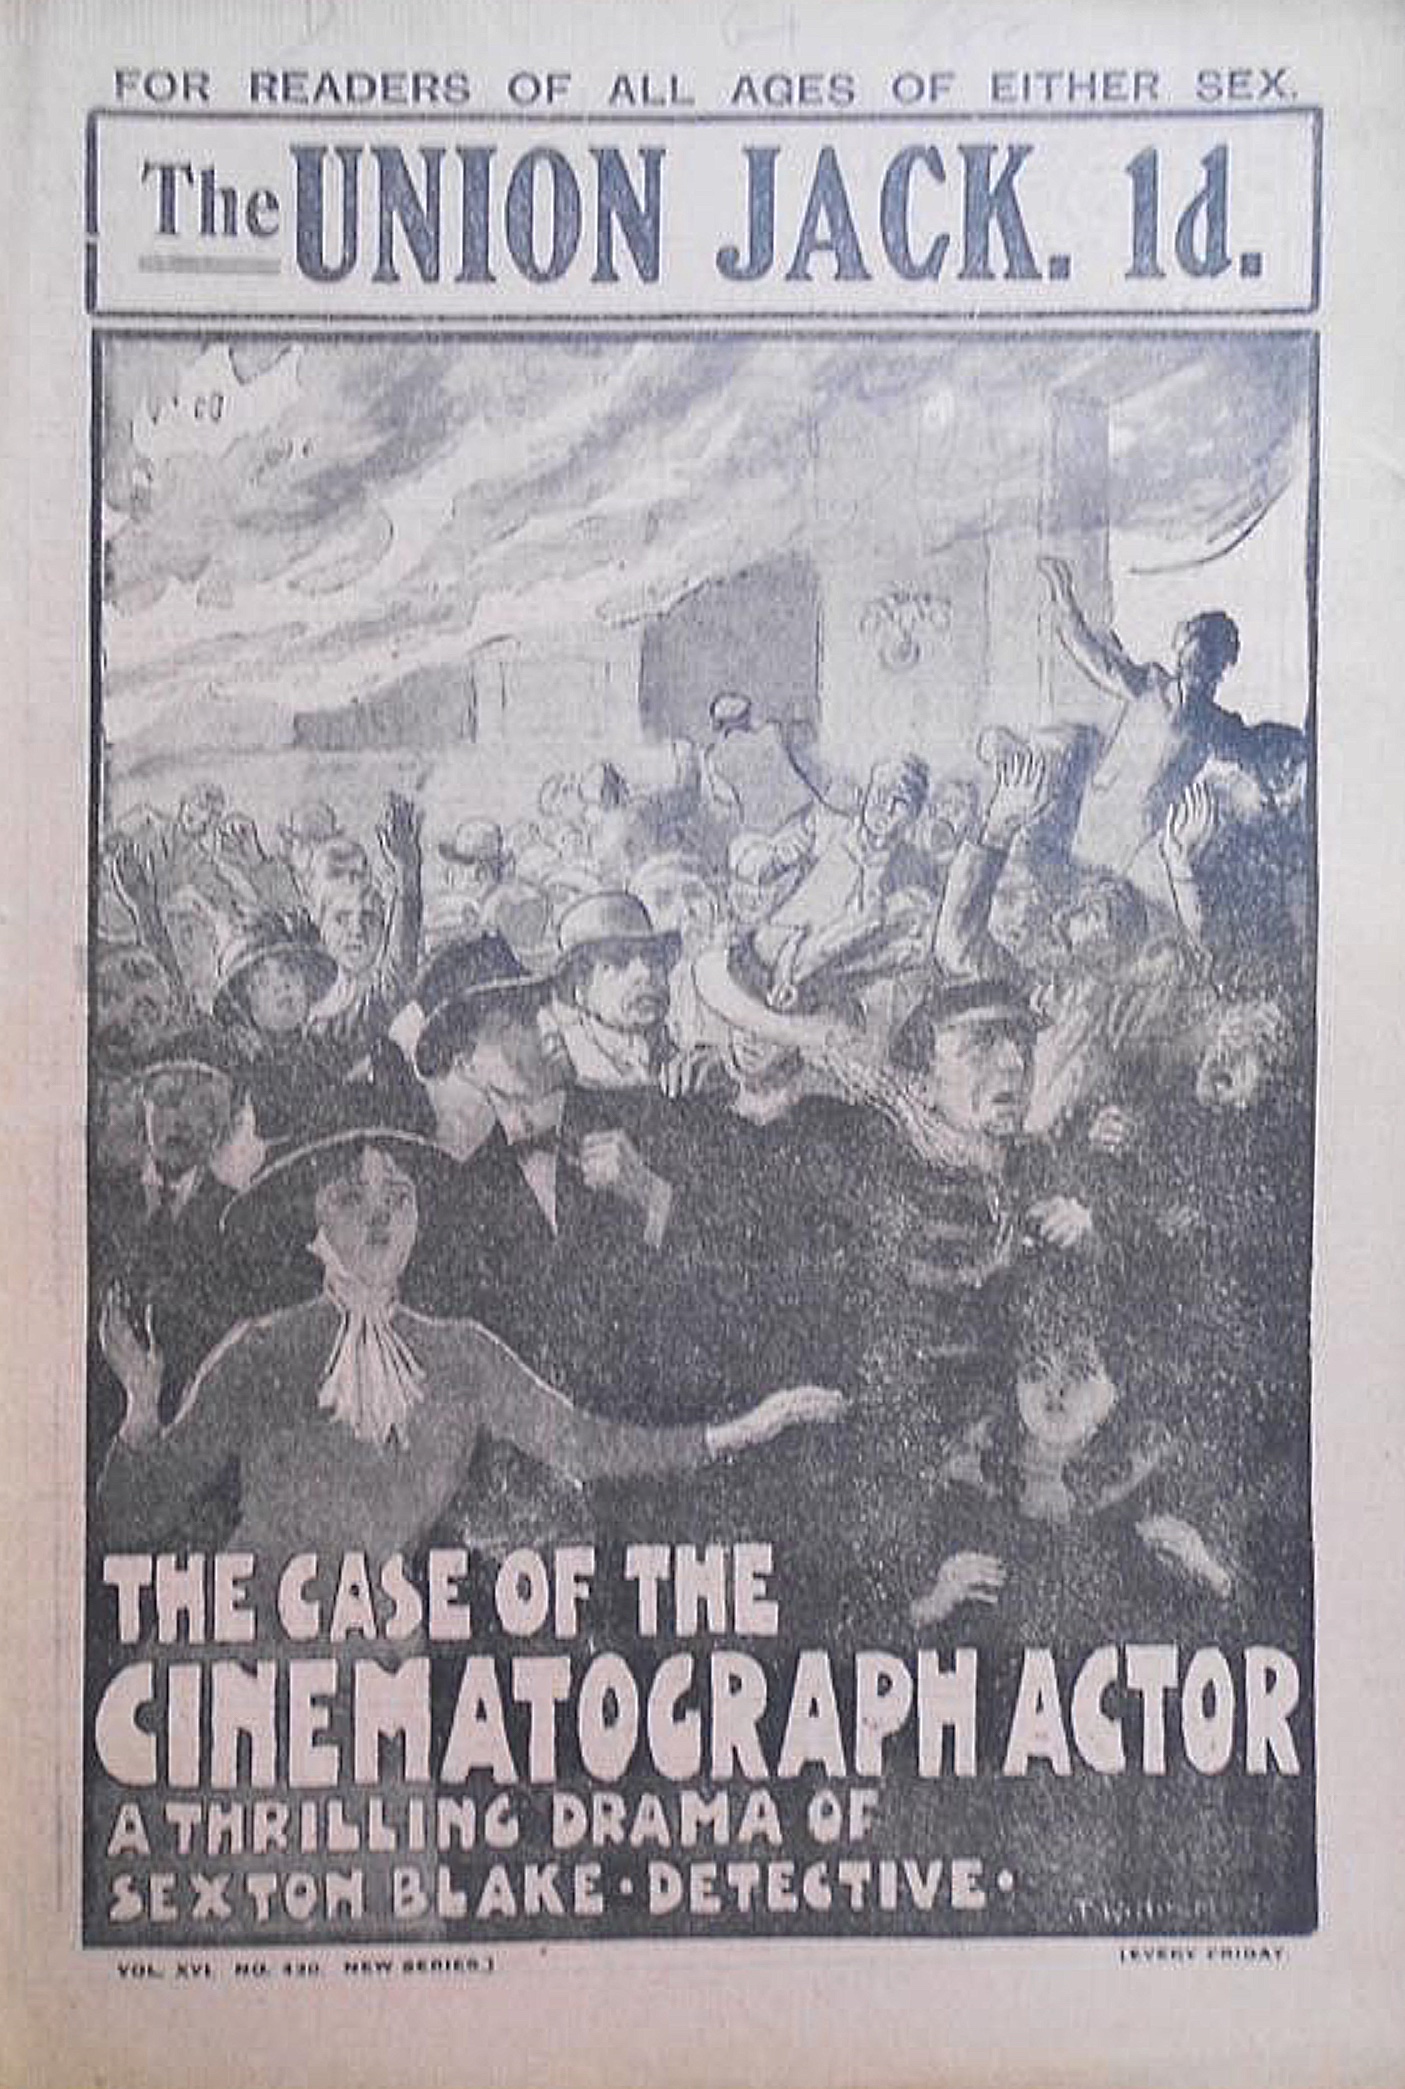 THE CASE OF THE CINEMATOGRAPH ACTOR